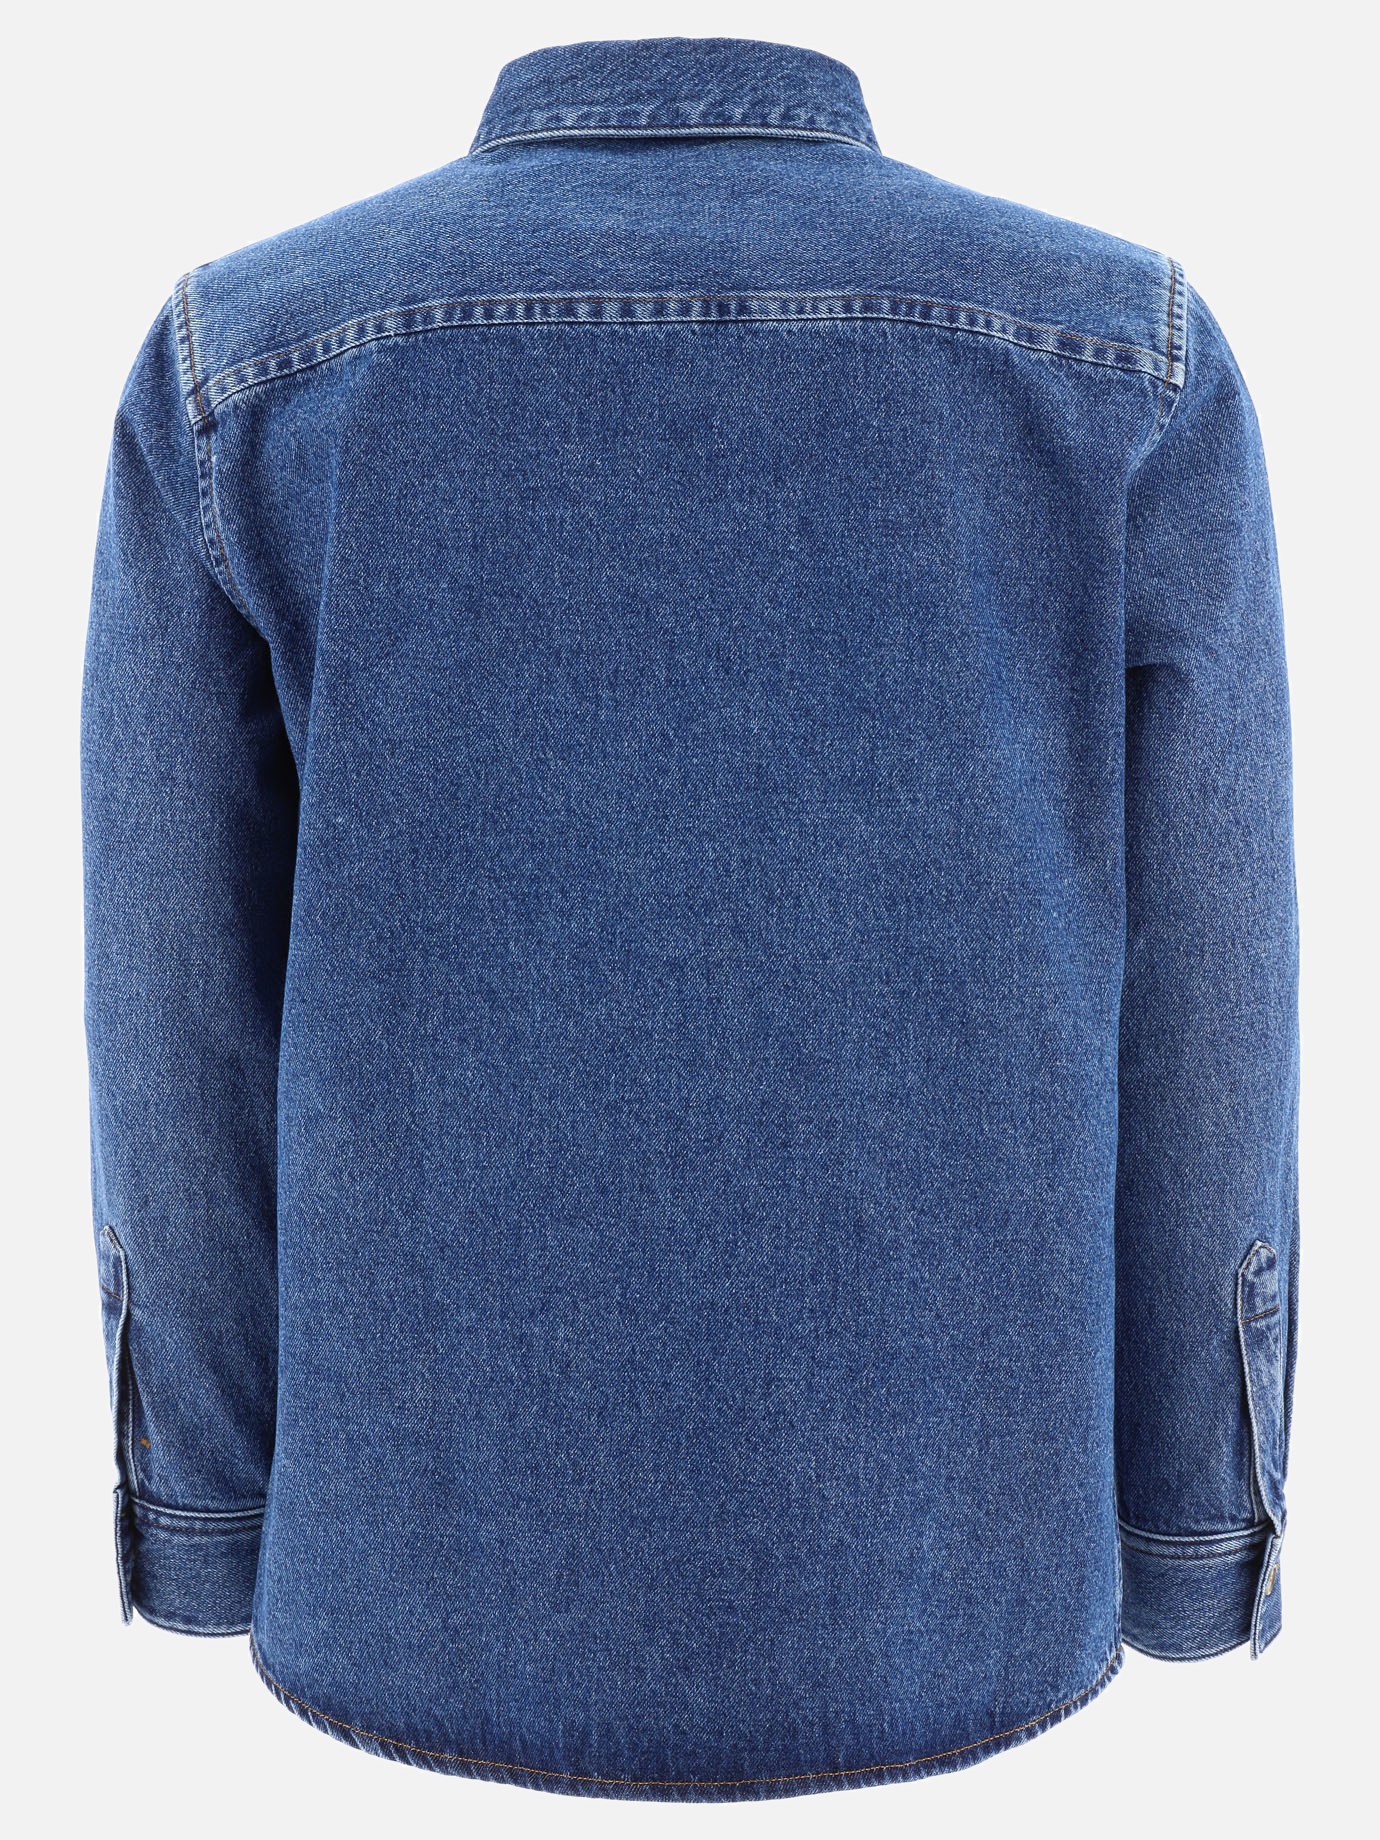  Cyril  overshirt by A.P.C.